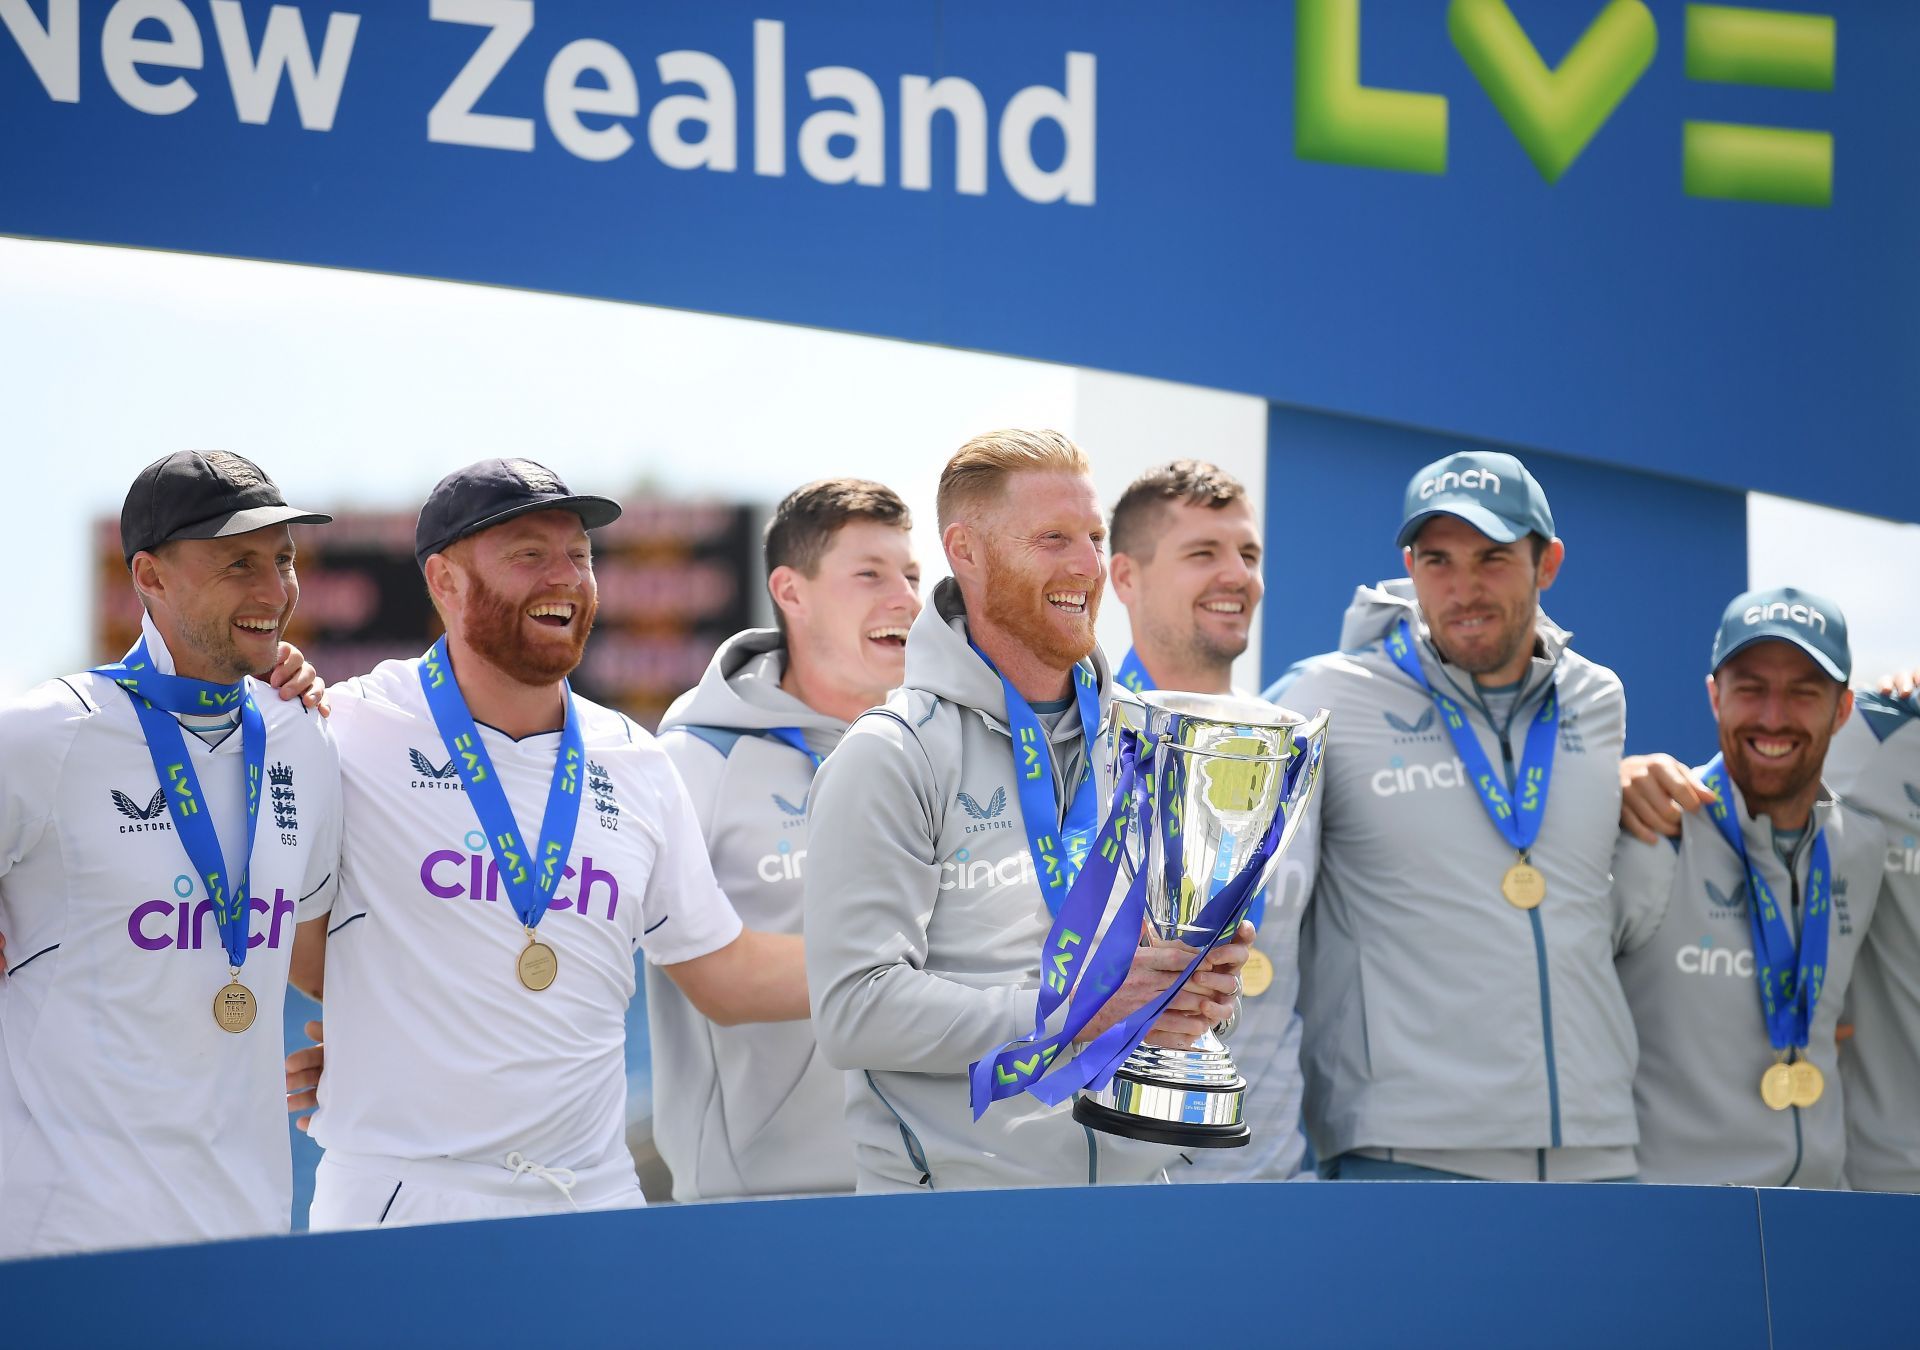 England recently won their ICC World Test Championship series against New Zealand (Image Courtesy: Getty Images)